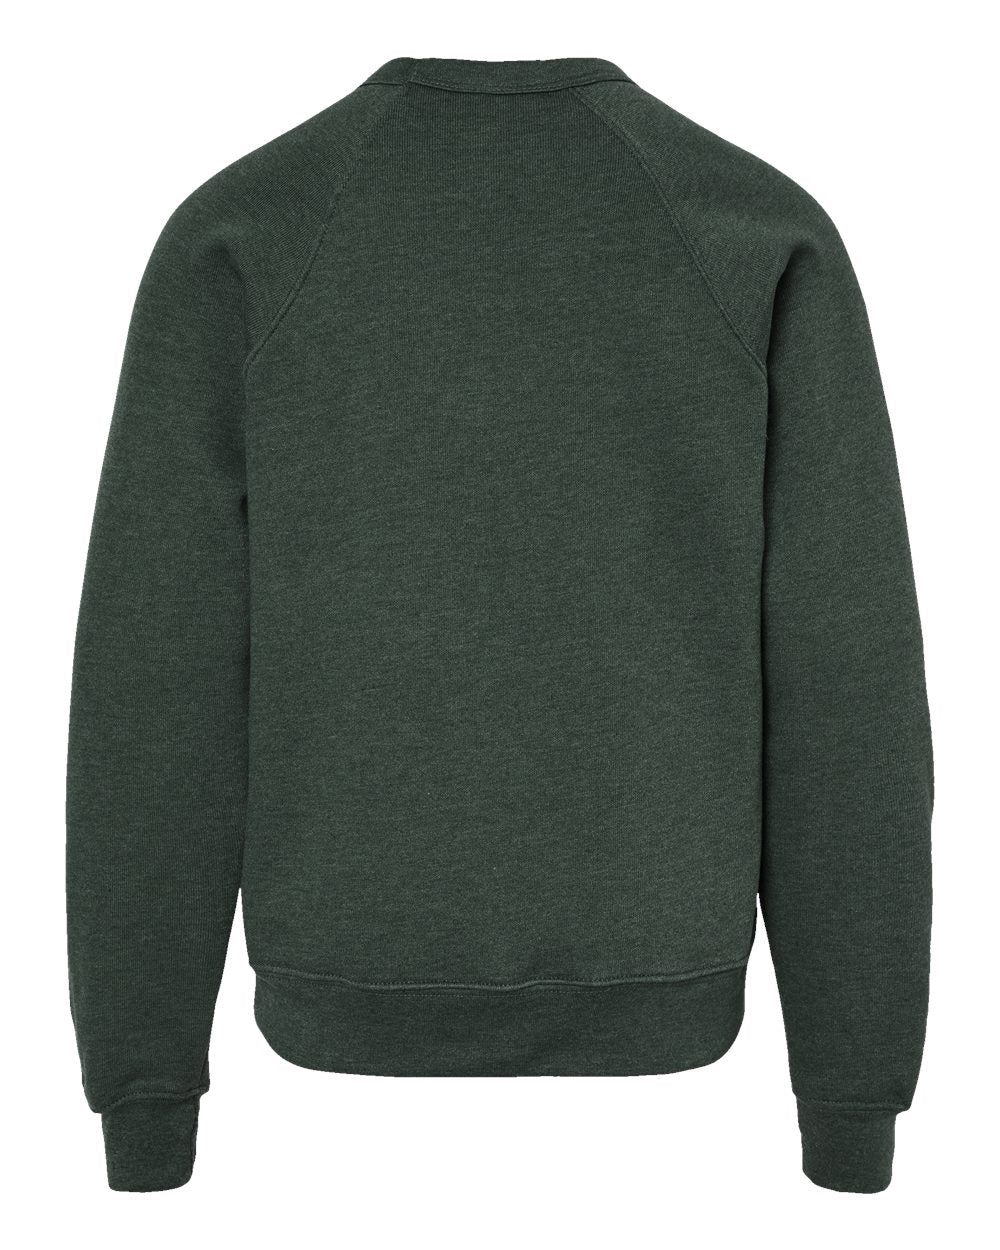 Youth Green Sweatshirt from Nudge Printing